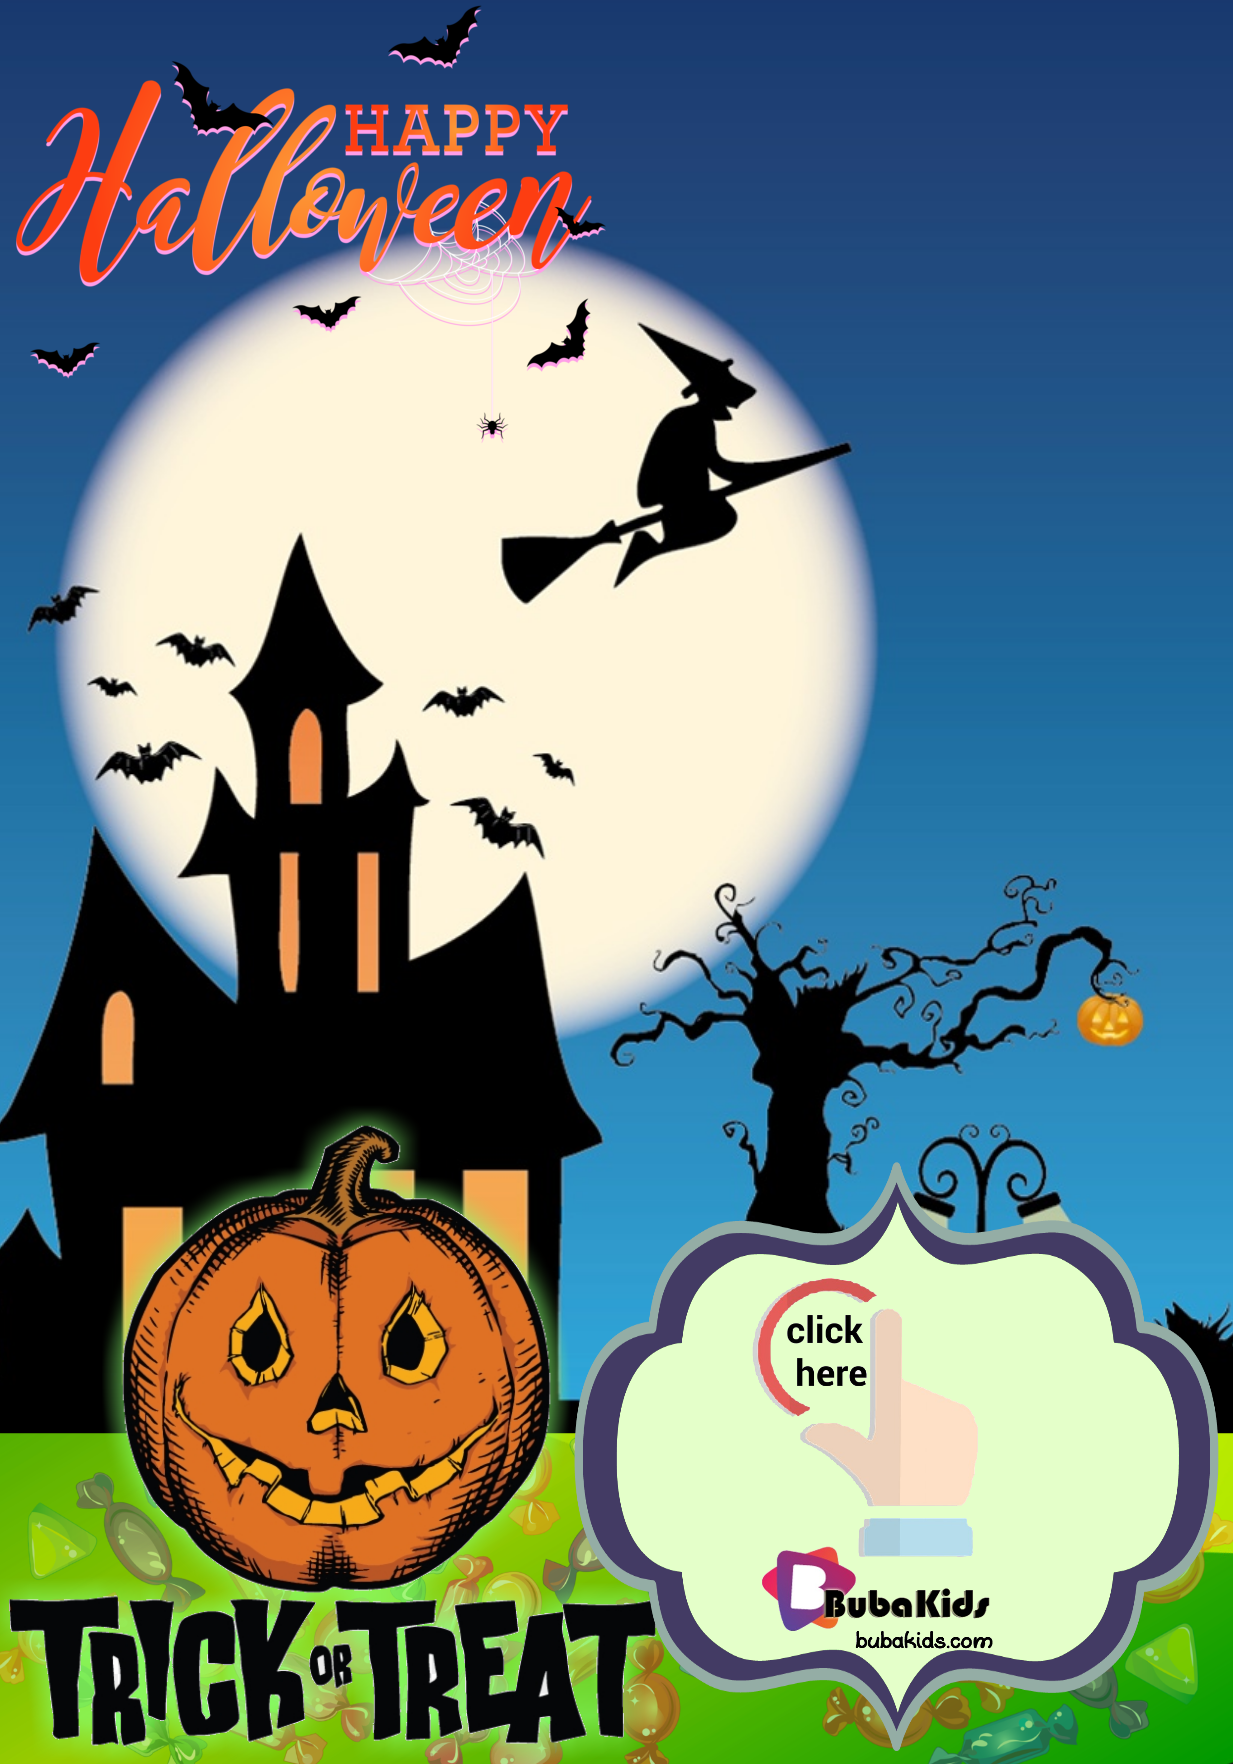 Haloween party invitation template free printable on bubakids.com